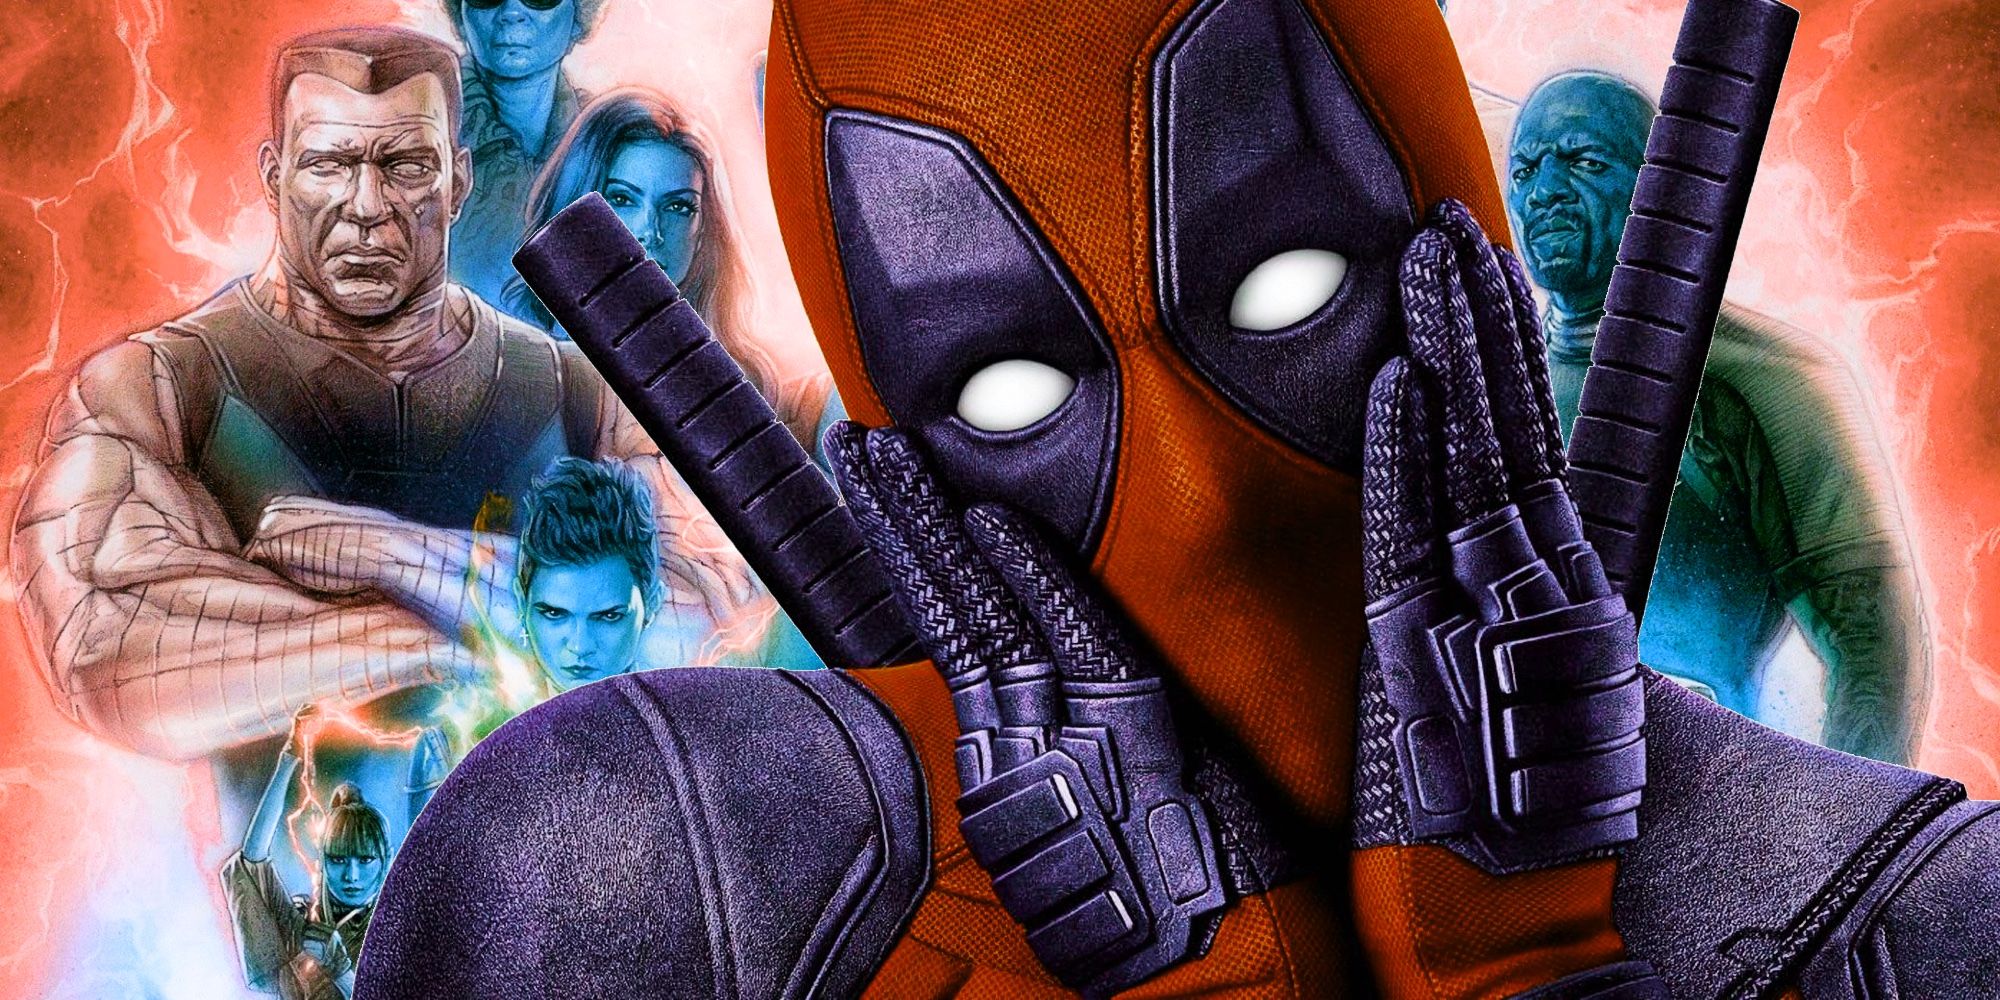 deadpool acting shocked and an illustrated x-force background